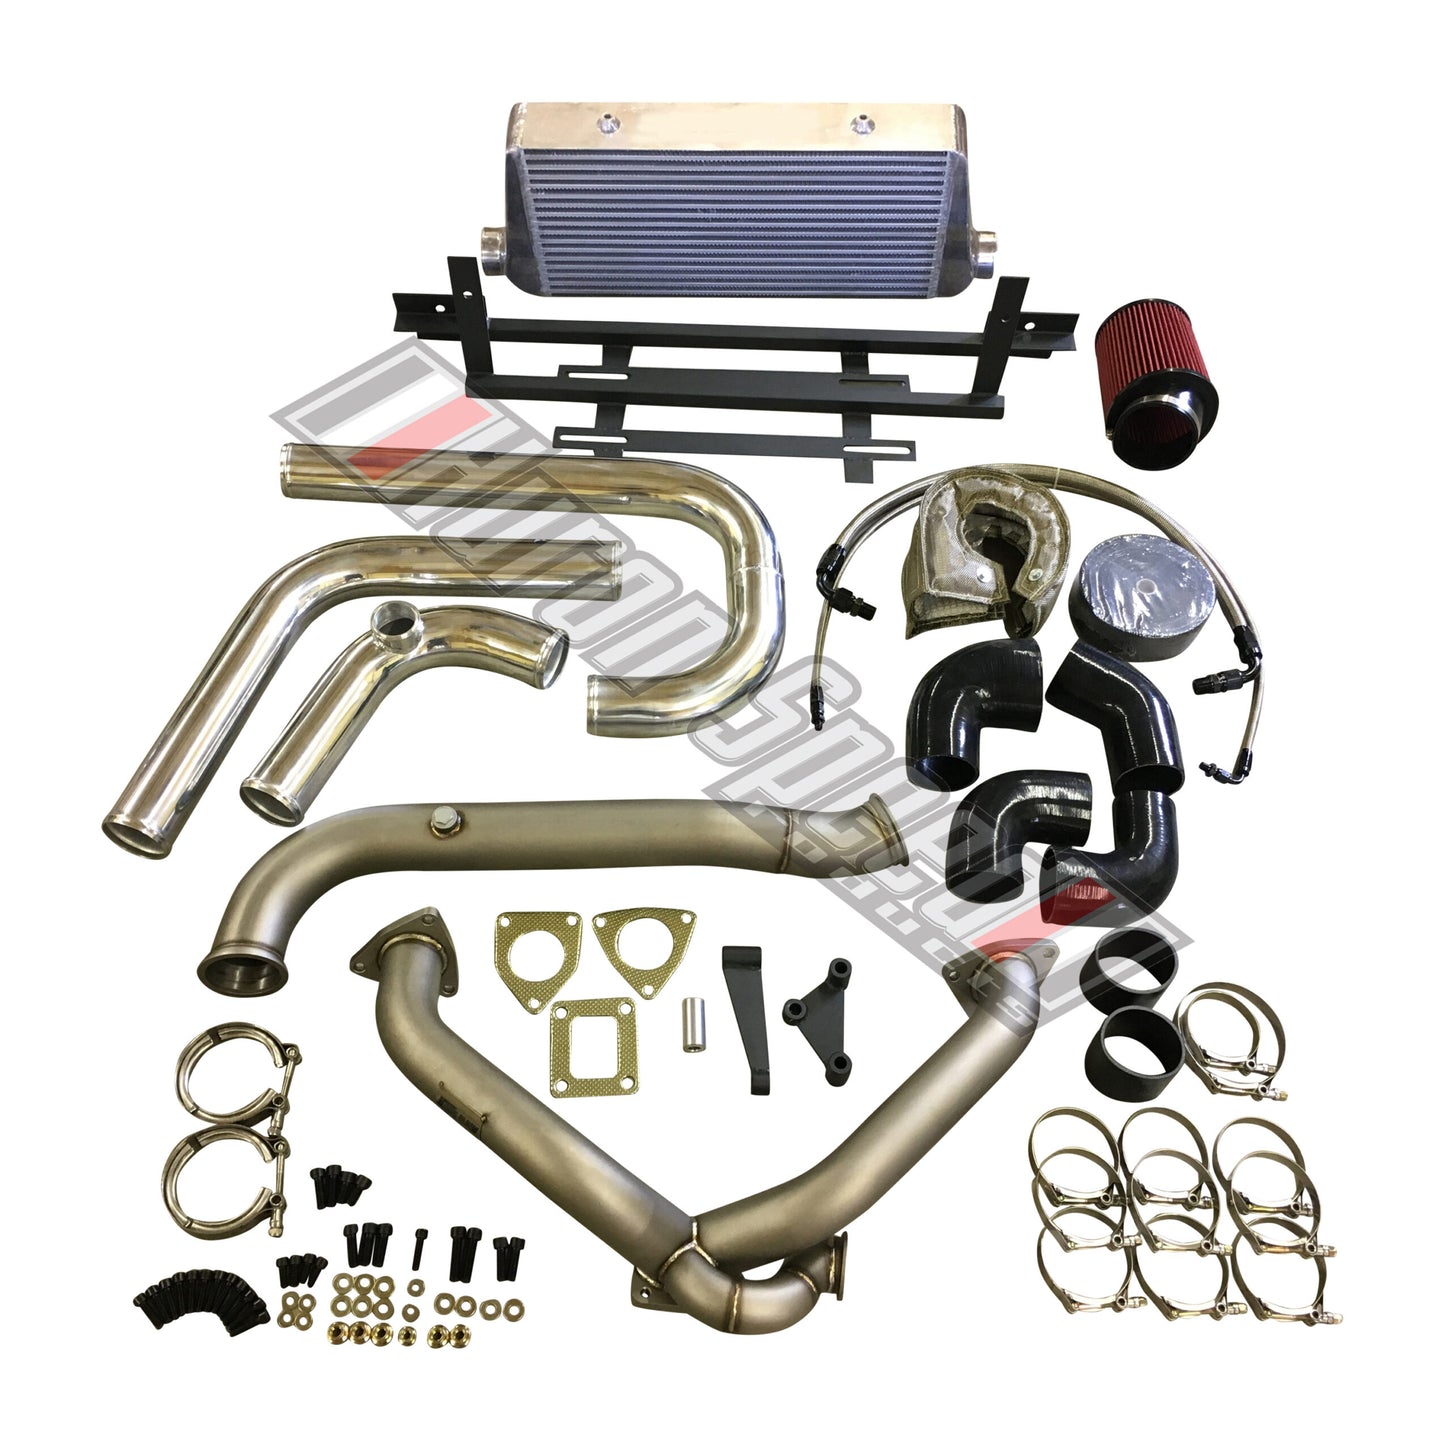 V1 Truck Manifold Turbo Kit Group Purchase Final Payment